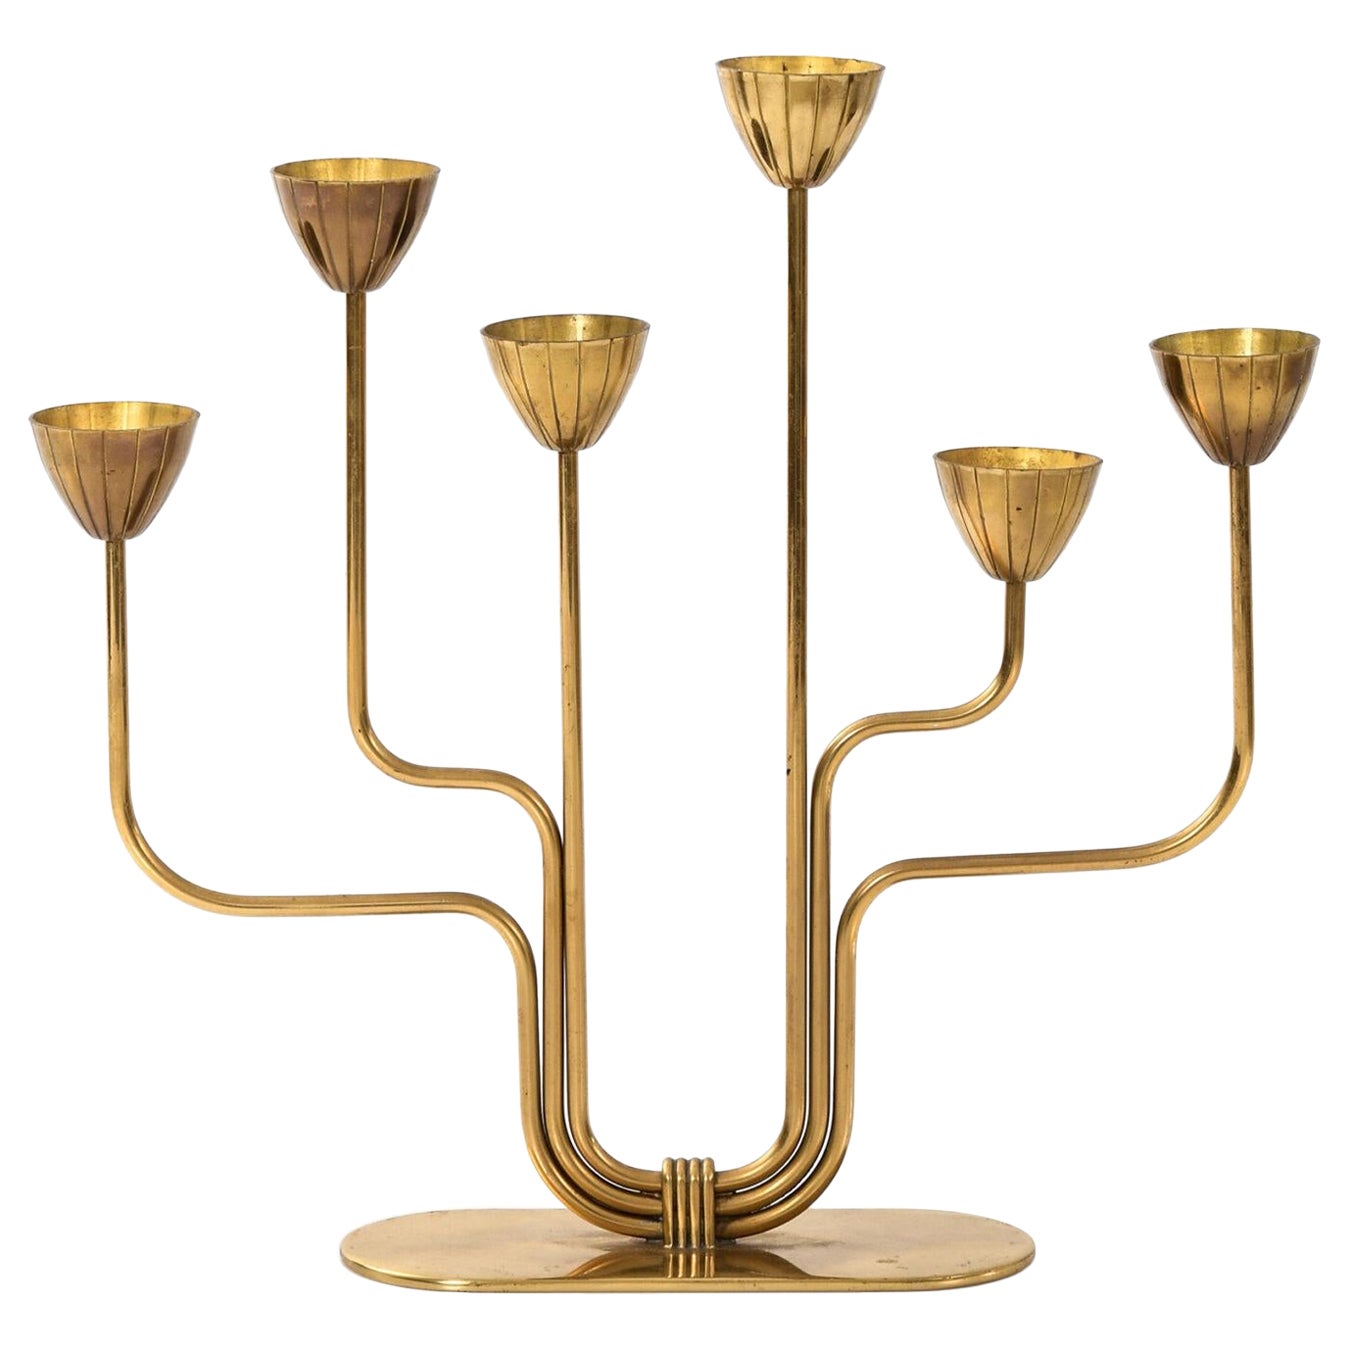 Gunnar Ander Candlestick Produced by Ystad Metall in Sweden